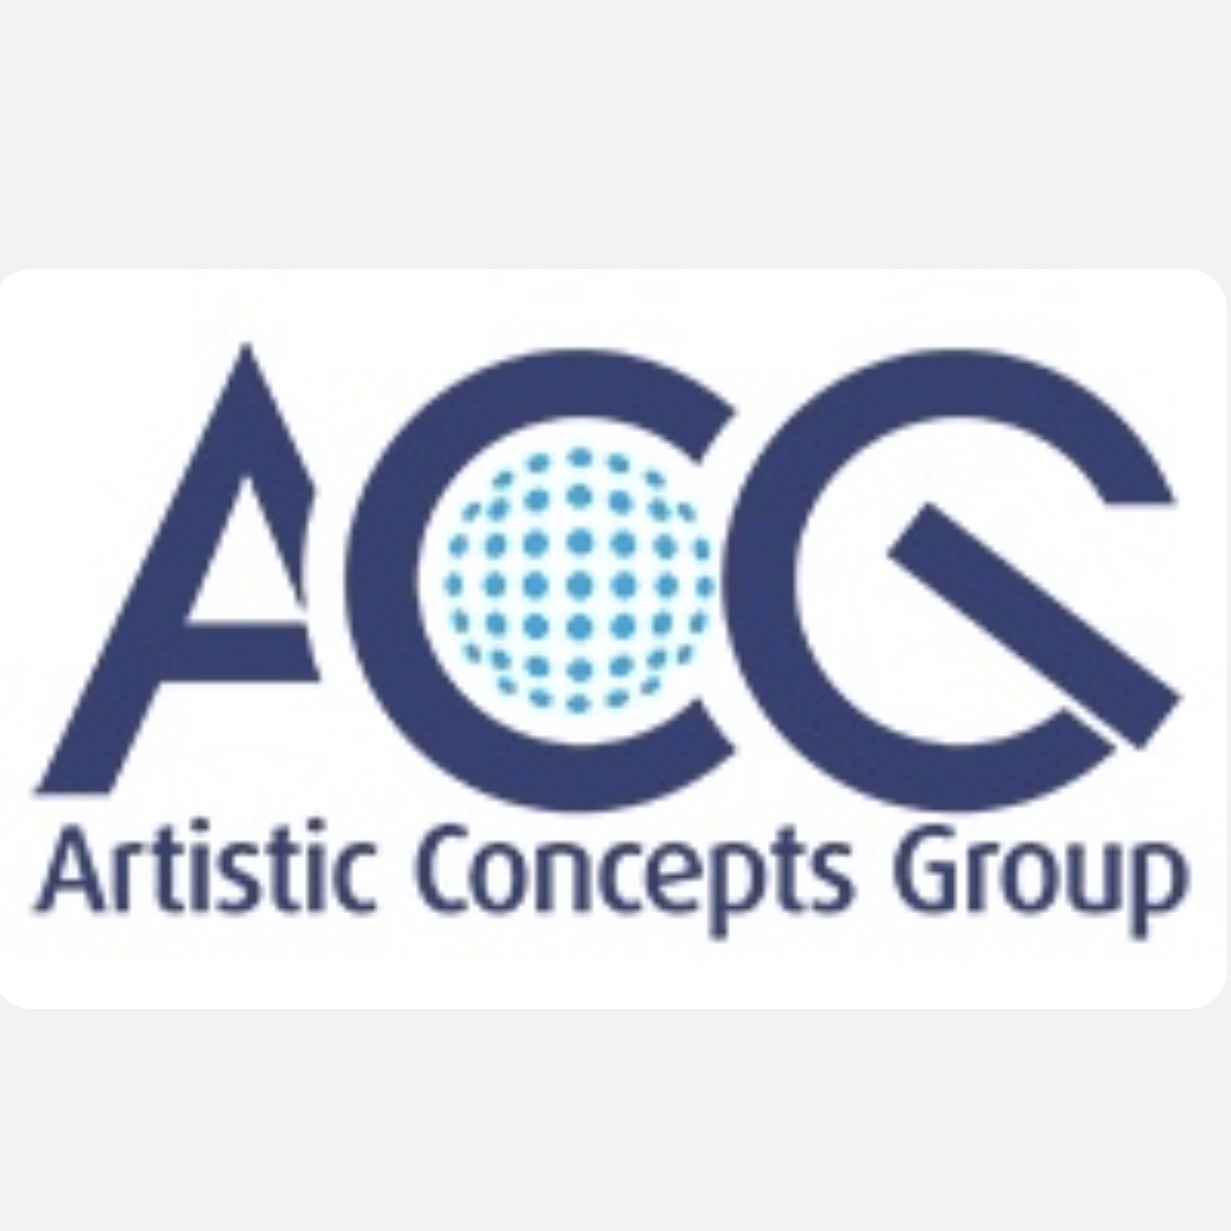 Artistic Concepts Group